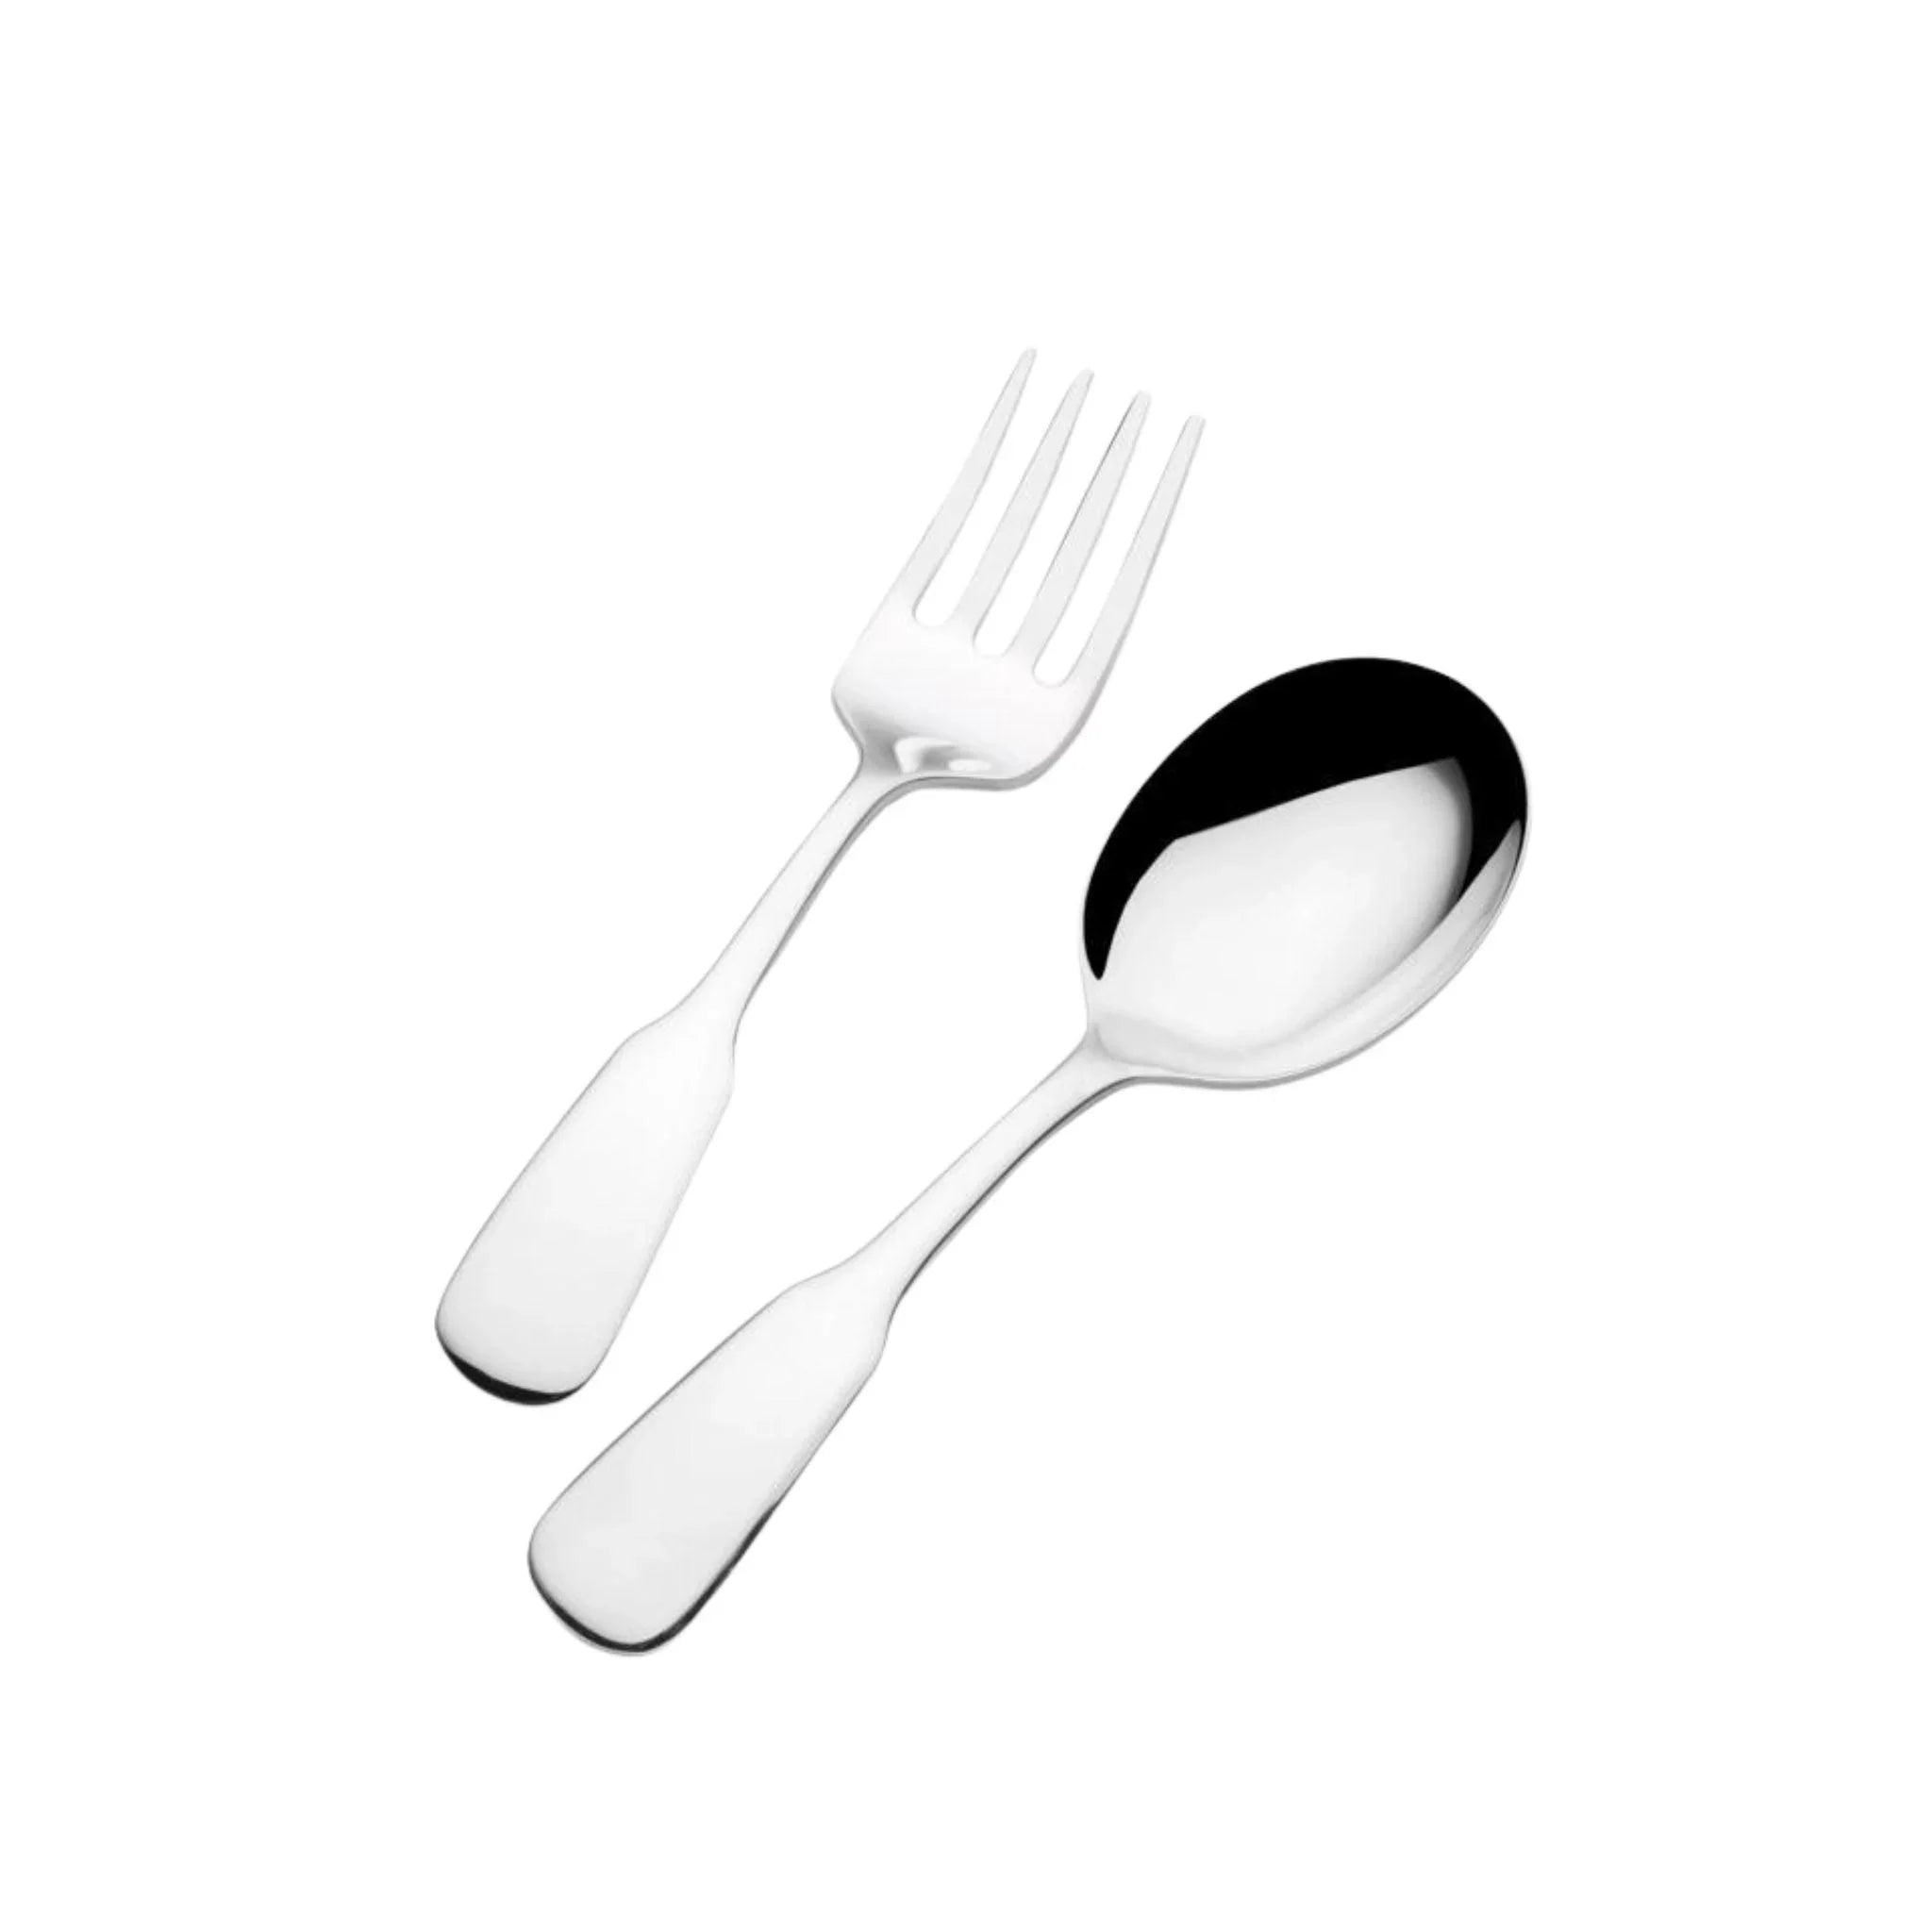 https://www.wellappointedhouse.com/cdn/shop/files/colonial-fork-and-spoon-baby-set-baby-gifts-the-well-appointed-house_e0abb7a7-b35e-4366-92c0-a7e2093edb31.webp?v=1691689276